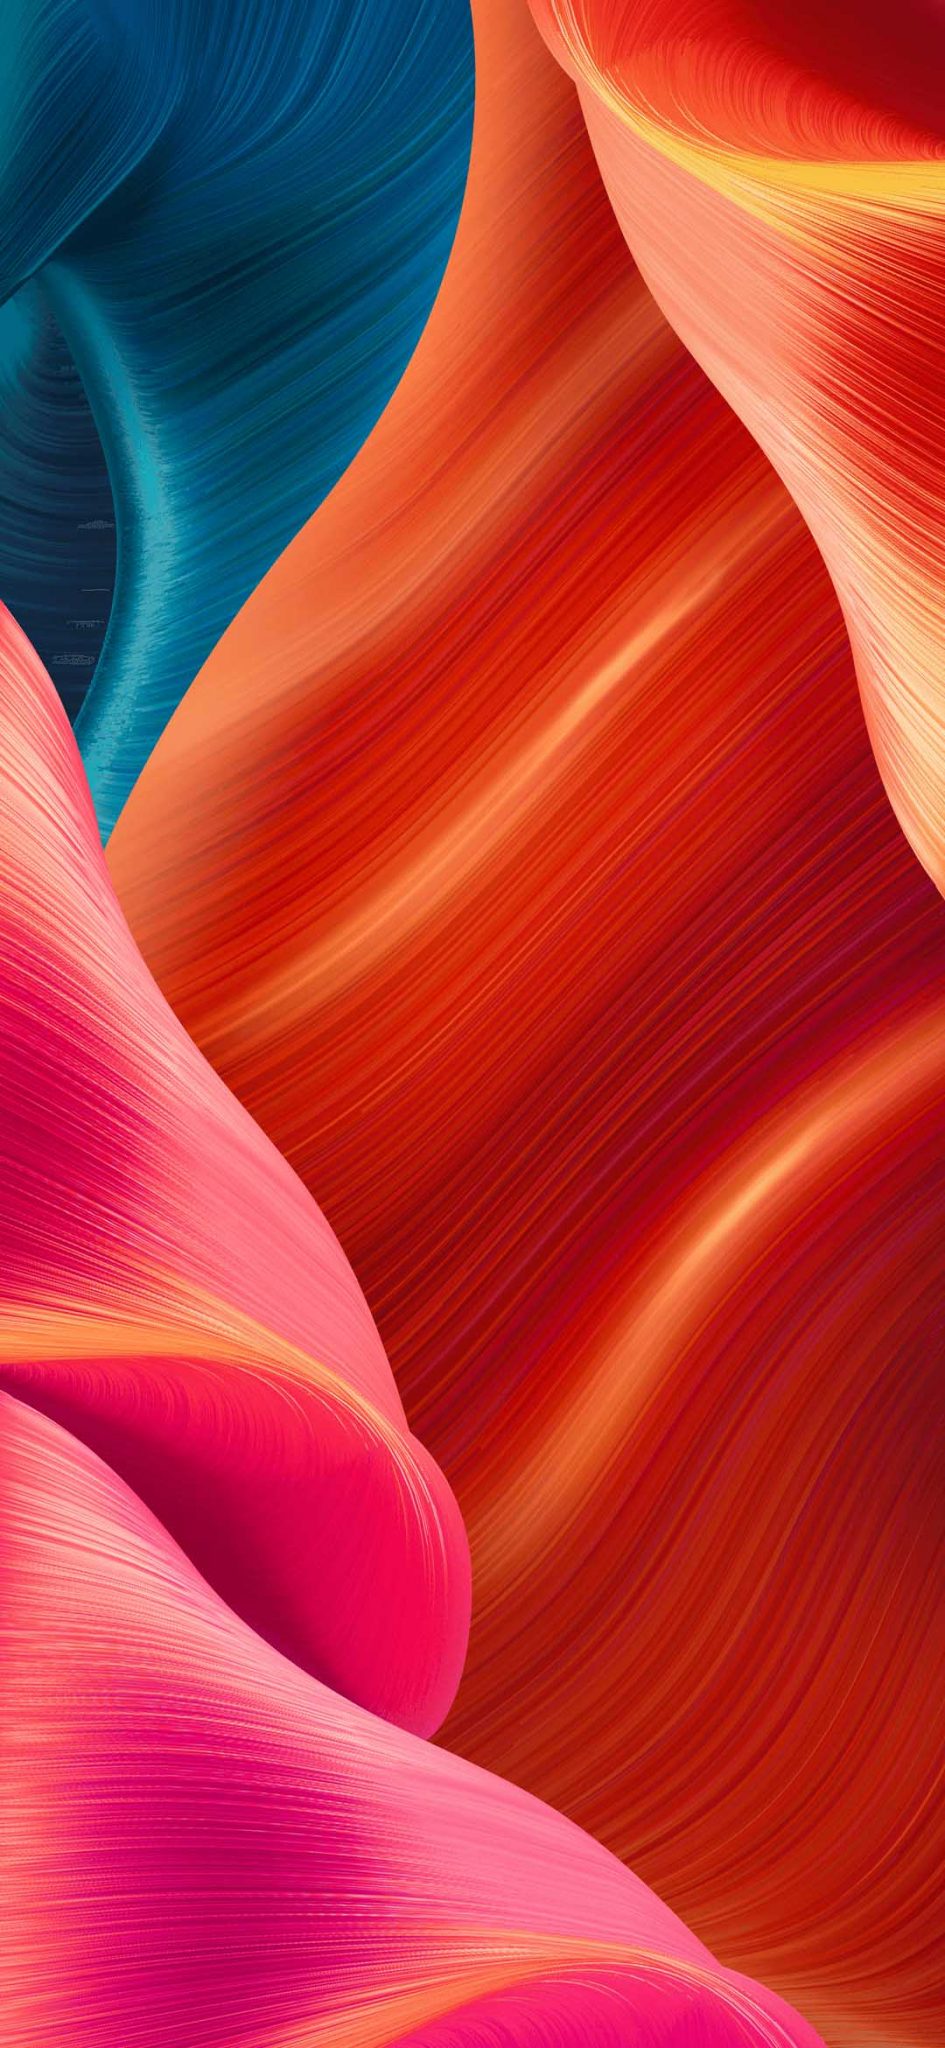 Download ColorOS 7 Stock Wallpapers  Full HD  Resolution  - 94